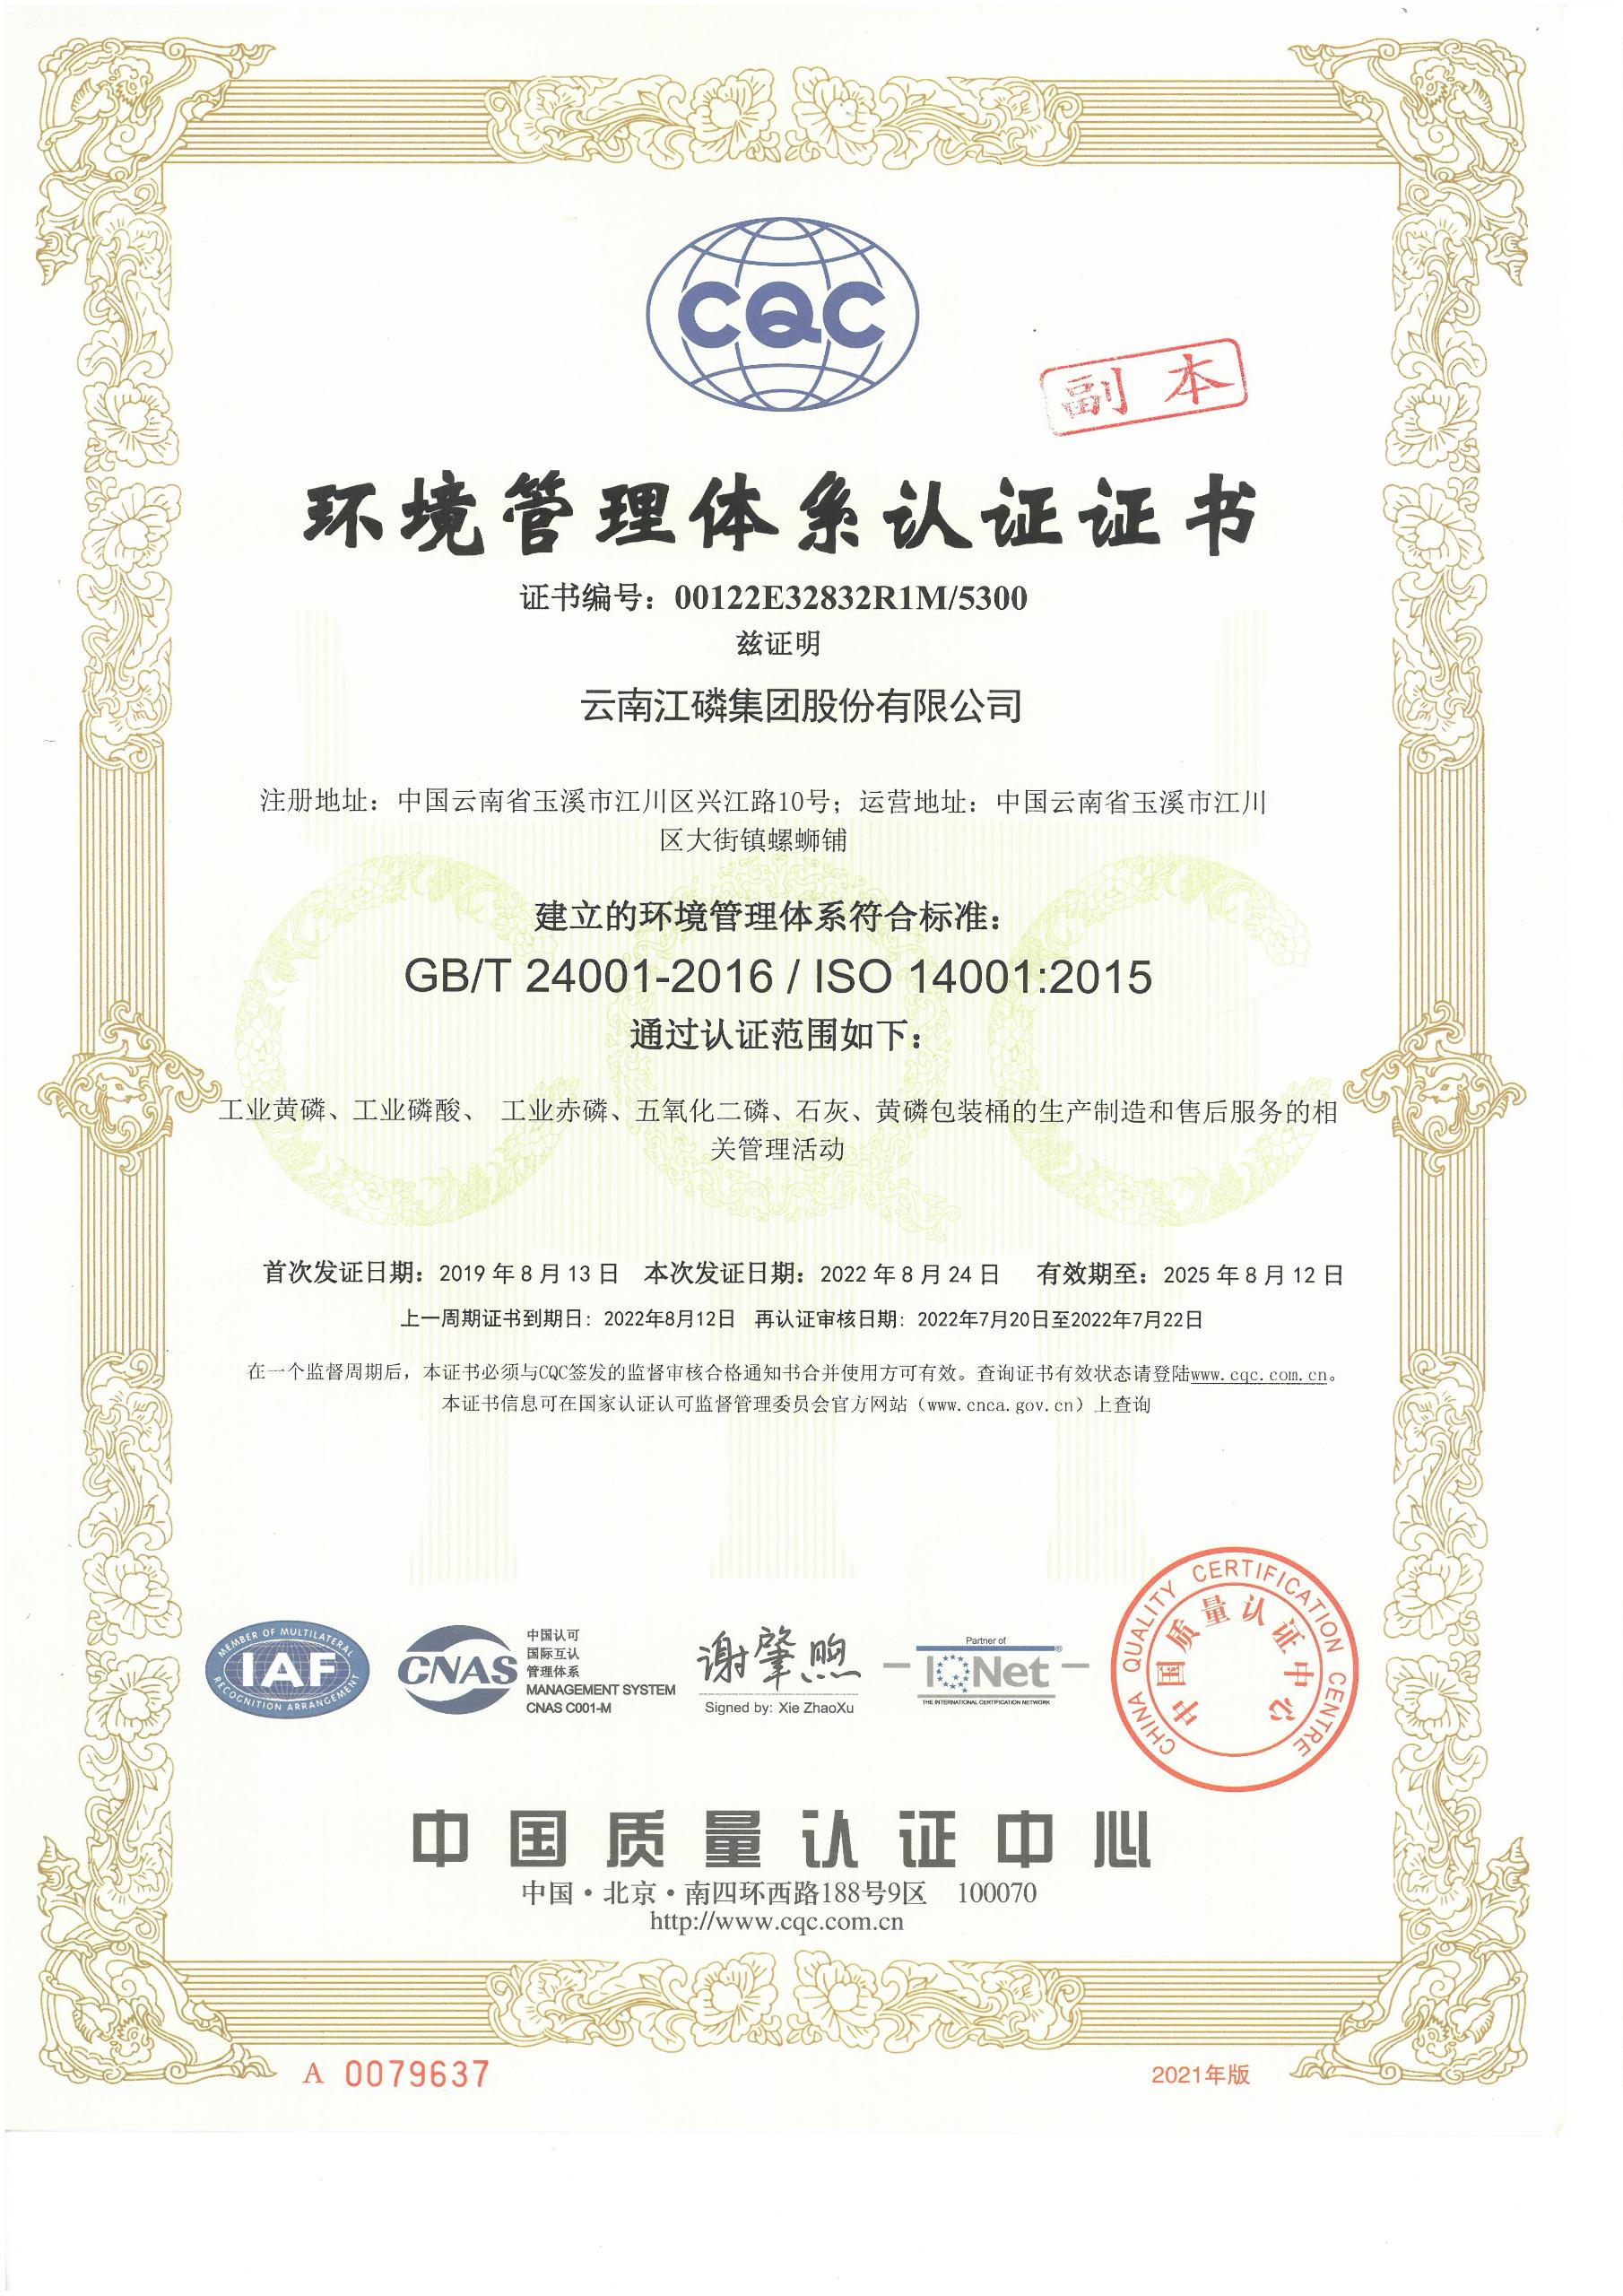 Environmental Management System certification certificate